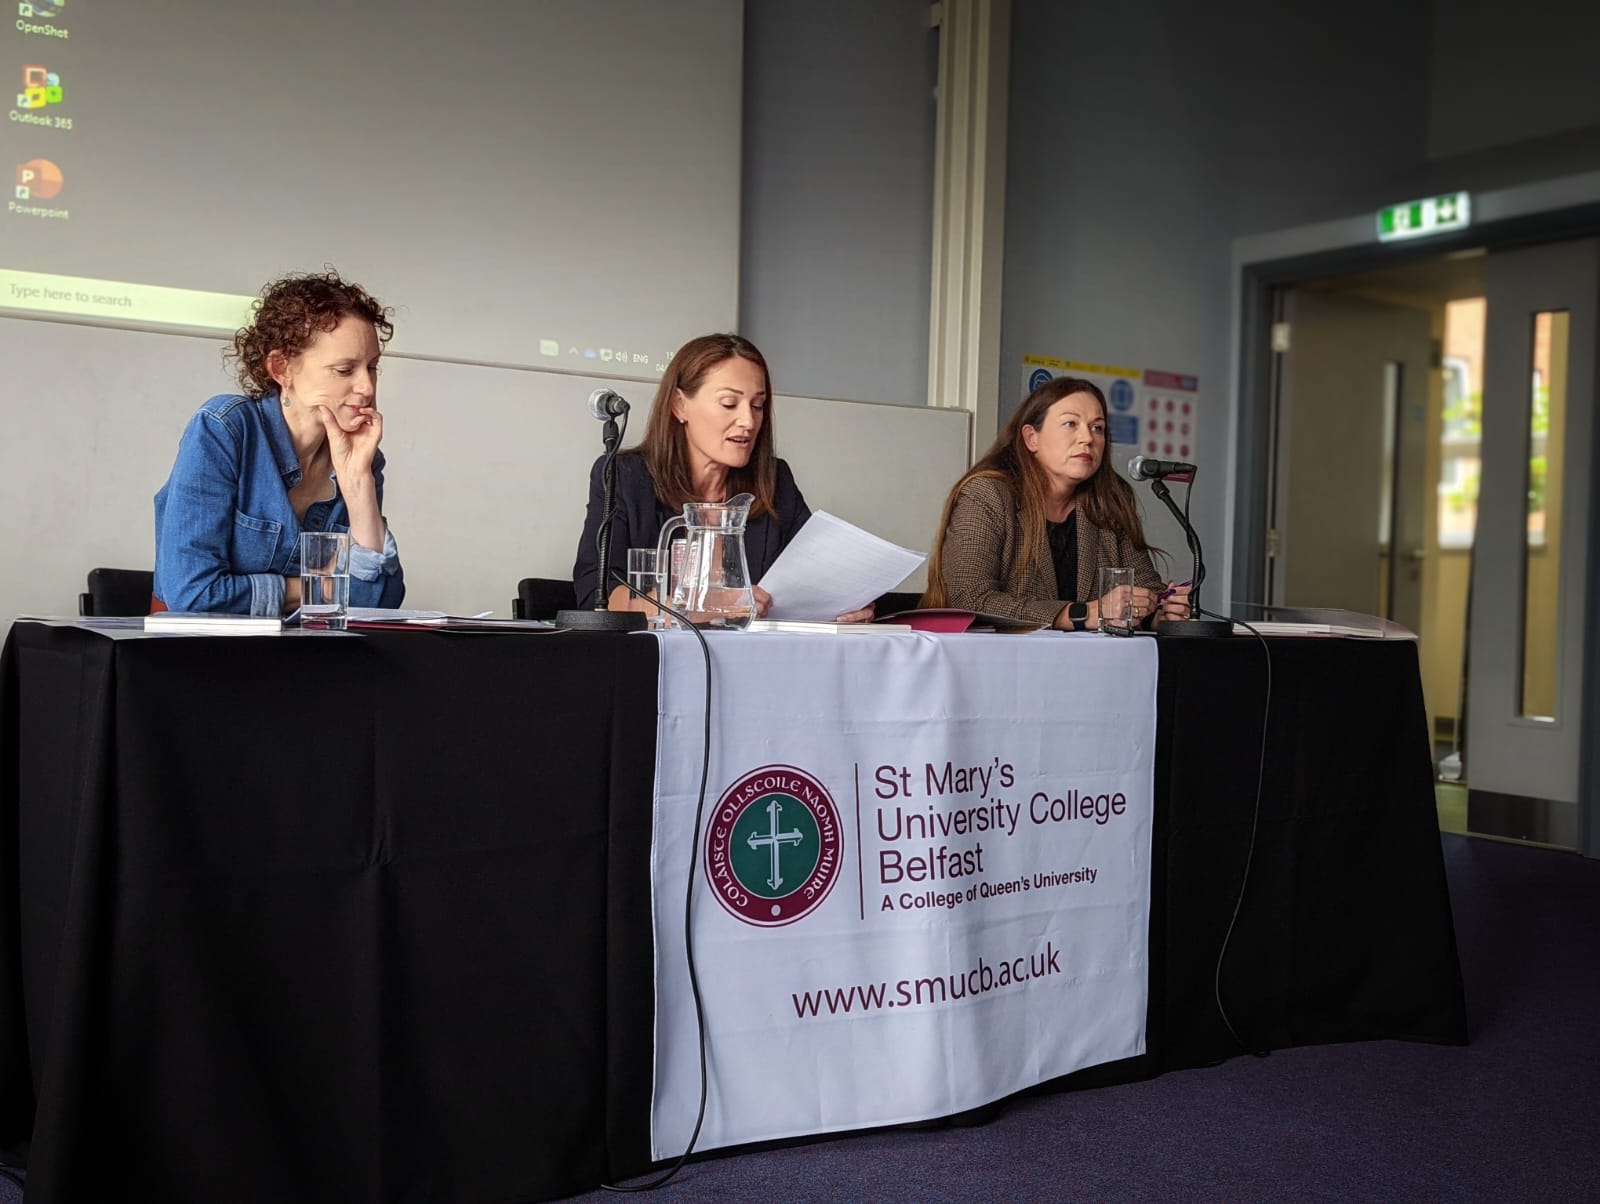 DISCUSSION: Senators Marie Sherlock and Erin McGeehan joined Sinn Féin TD Louise O’Reilly, right, to discuss preparations for a \'New Ireland\'